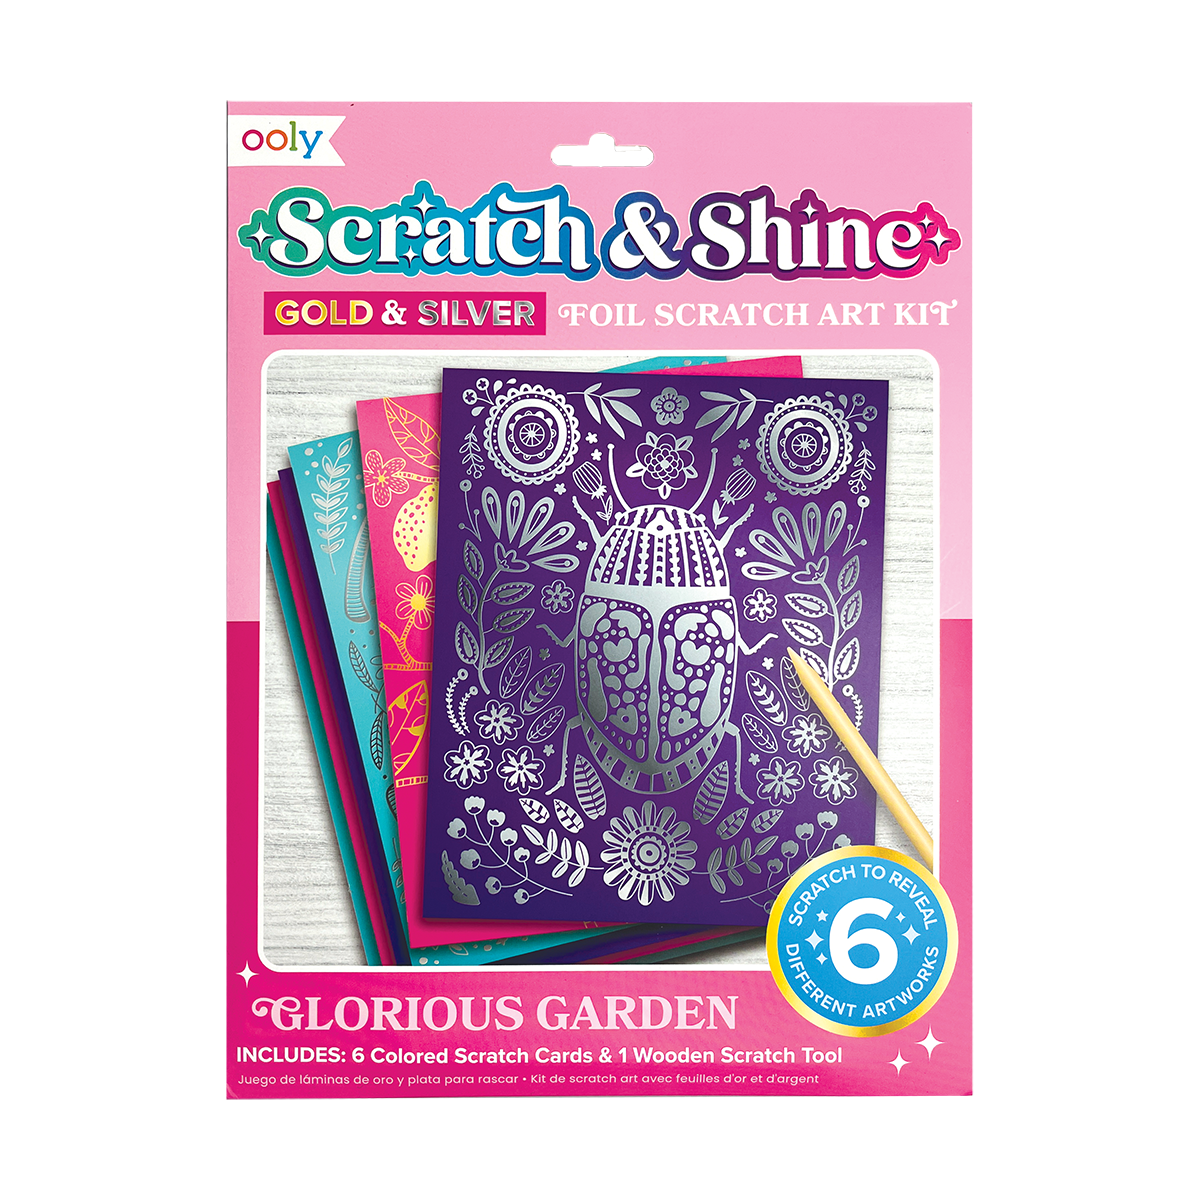 OOLY Scratch and Shine Foil Scratch Art Kit - Glorious Garden in packaging